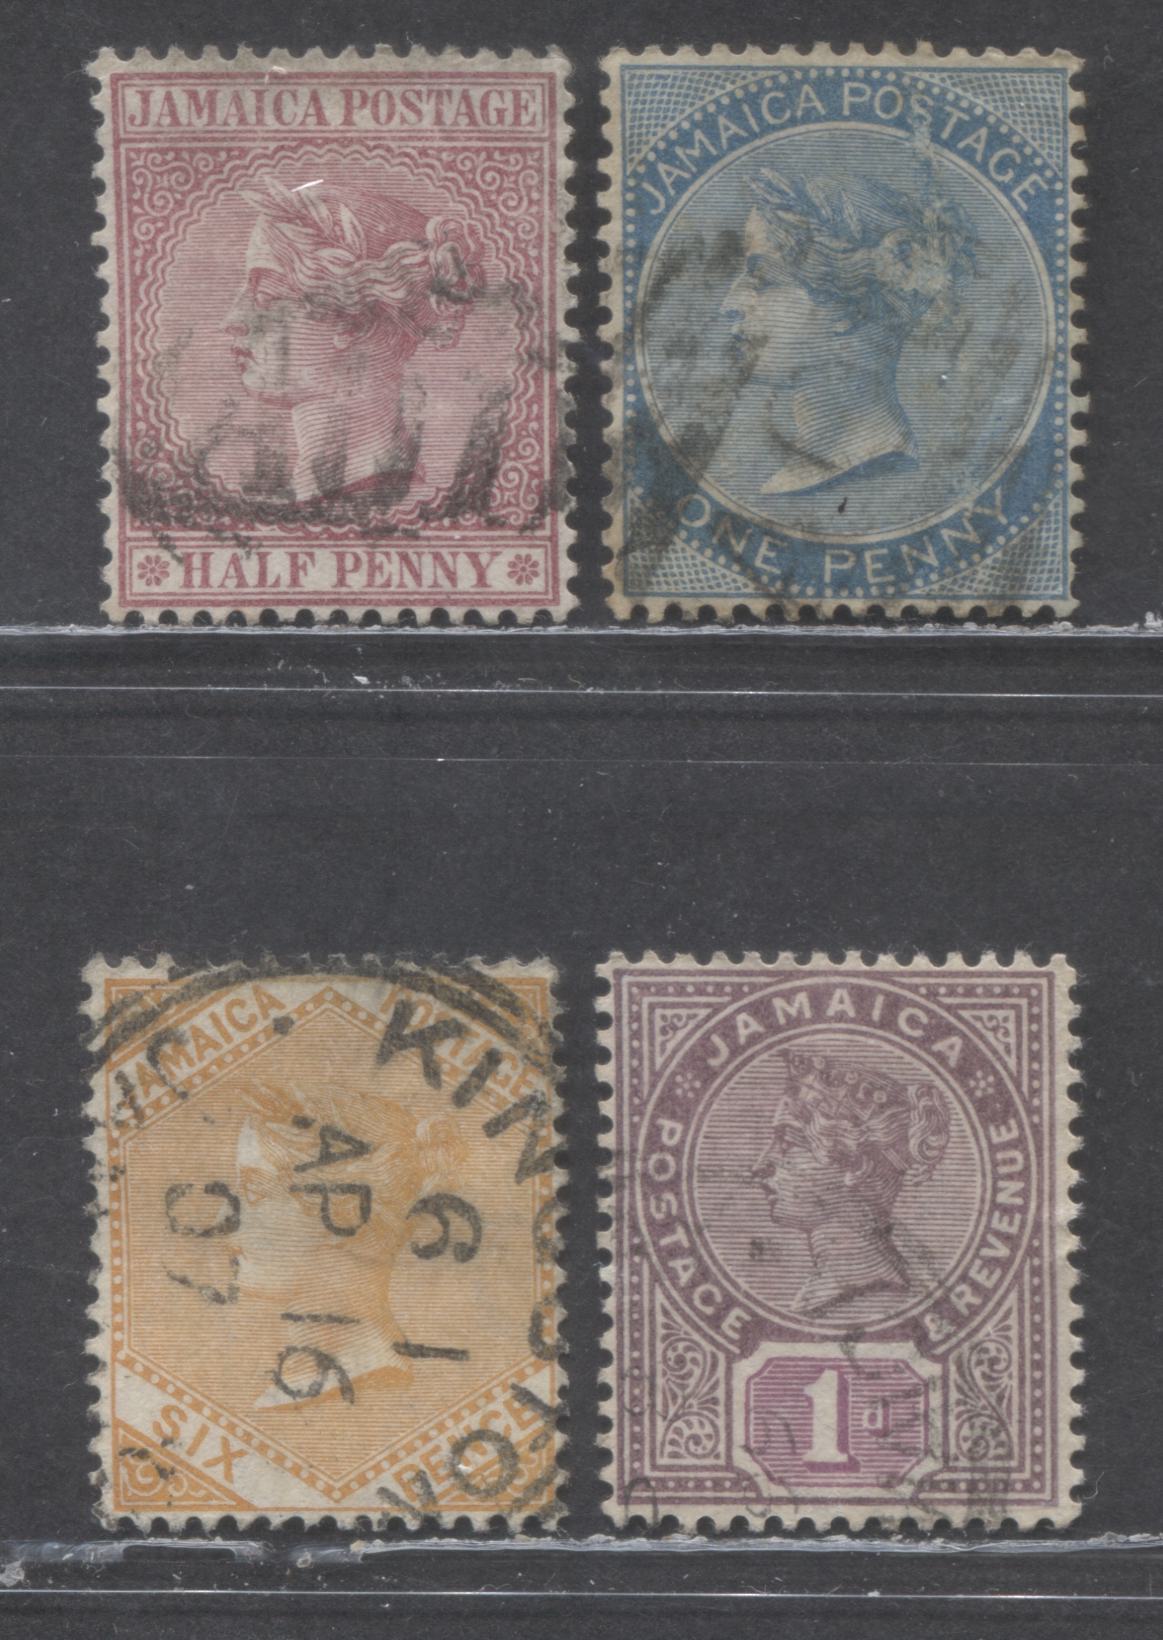 Lot 411 Jamaica SC#7/52a 1870-1911 Queen Victoria Keyplates, 4 Very Fine Used Singles, Click on Listing to See ALL Pictures, 2022 Scott Classic Cat. $32.65 USD